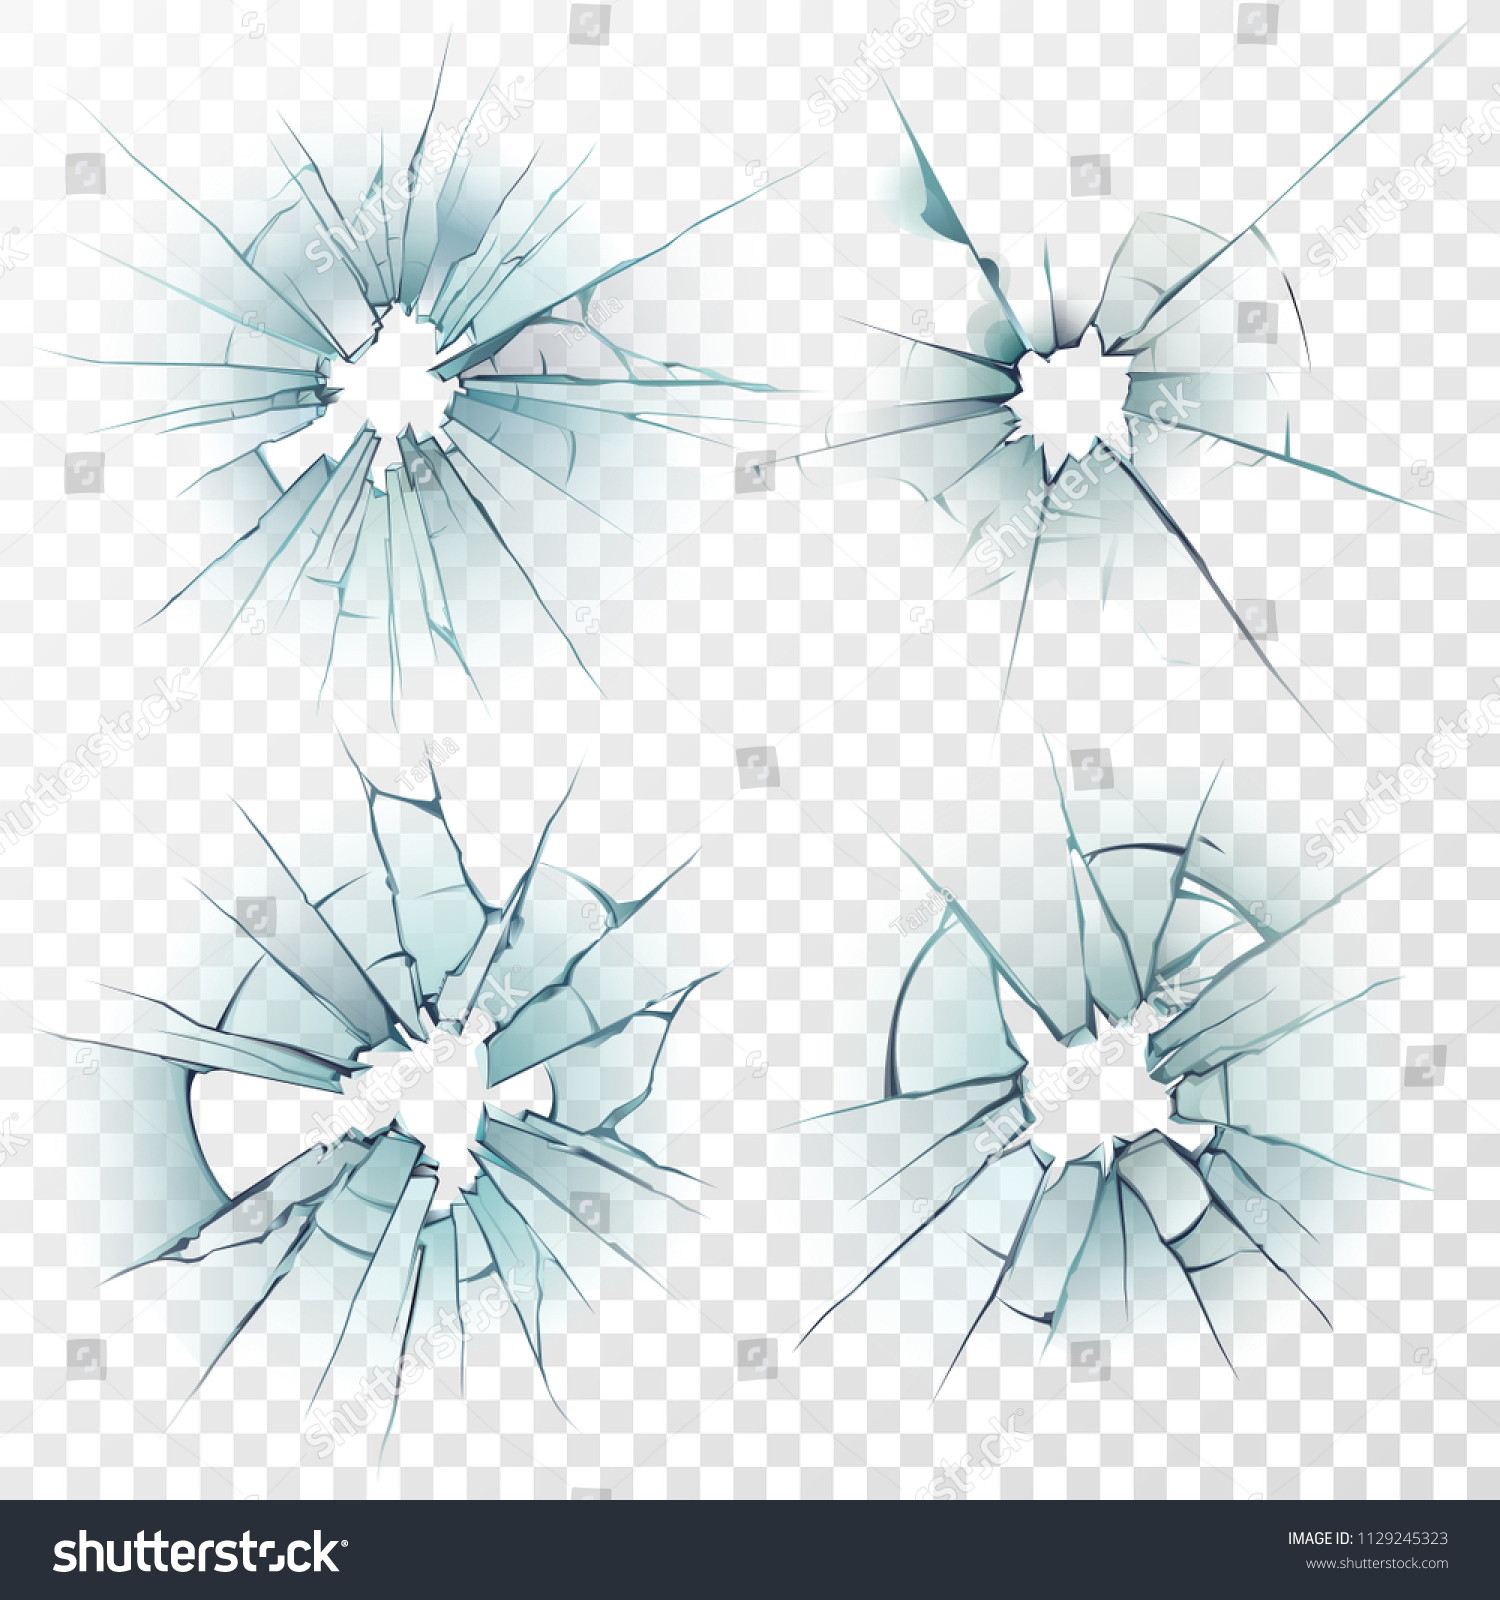 SVG of Broken glass. Cracked texture on deforming mirror, smashed windows or damaged car windshield by bullet 3D sharp destruction crash smash ice surface. Realistic repair crack hole isolated vector set svg